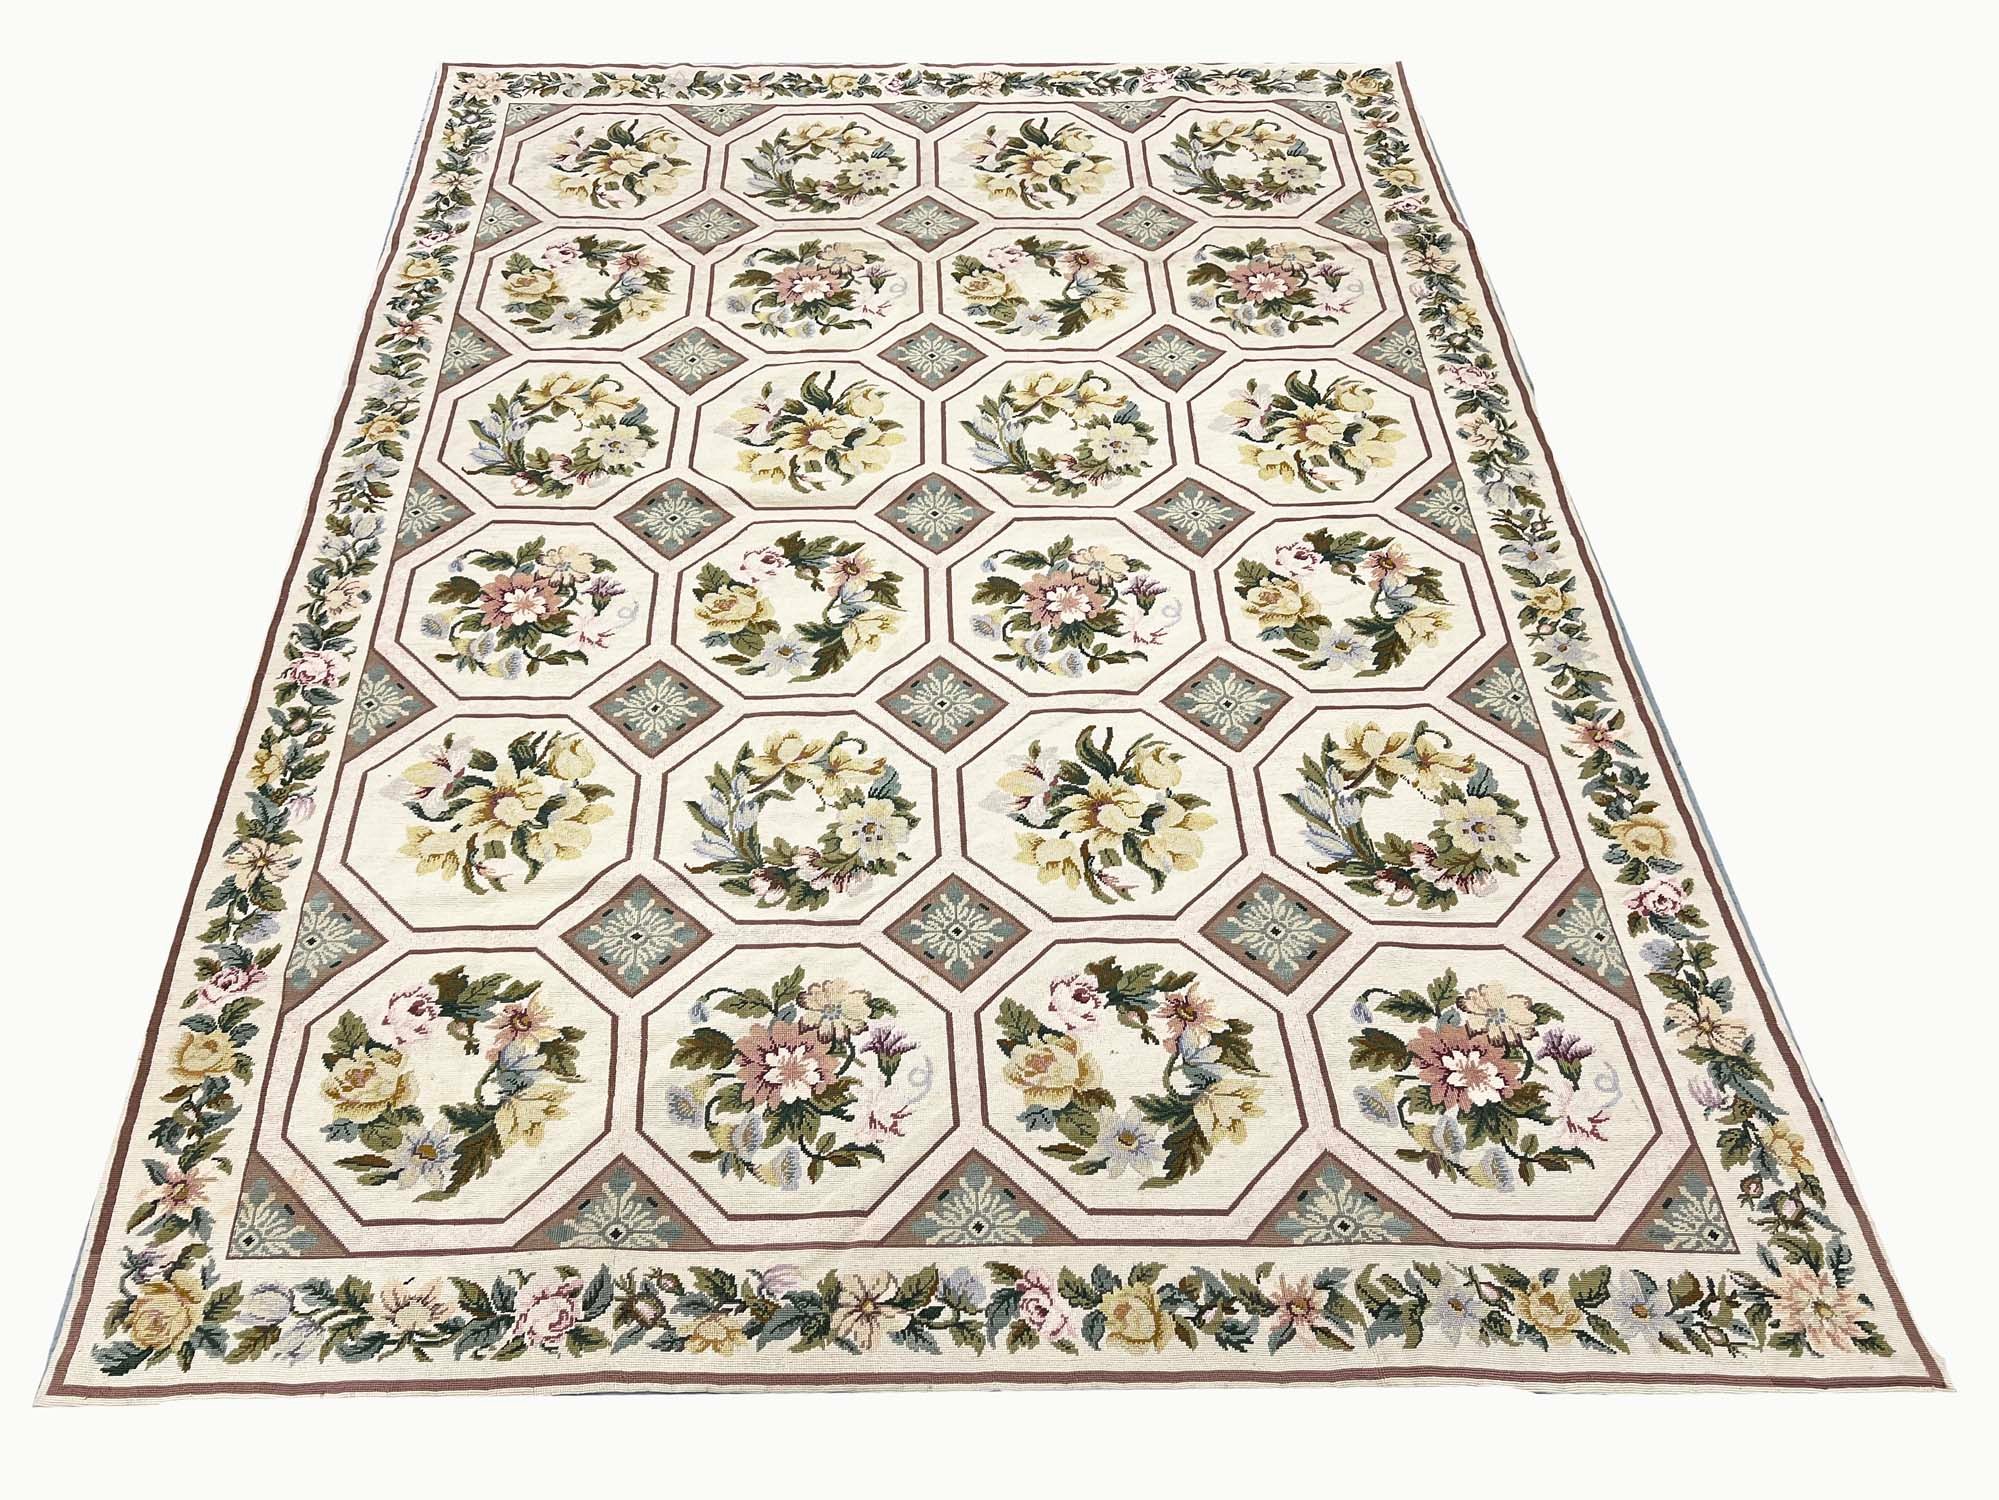 NEEDLEPOINT WOOLEN CARPET, 273cm x 193cm, Cream-coloured ground inset with floral-sprigs within